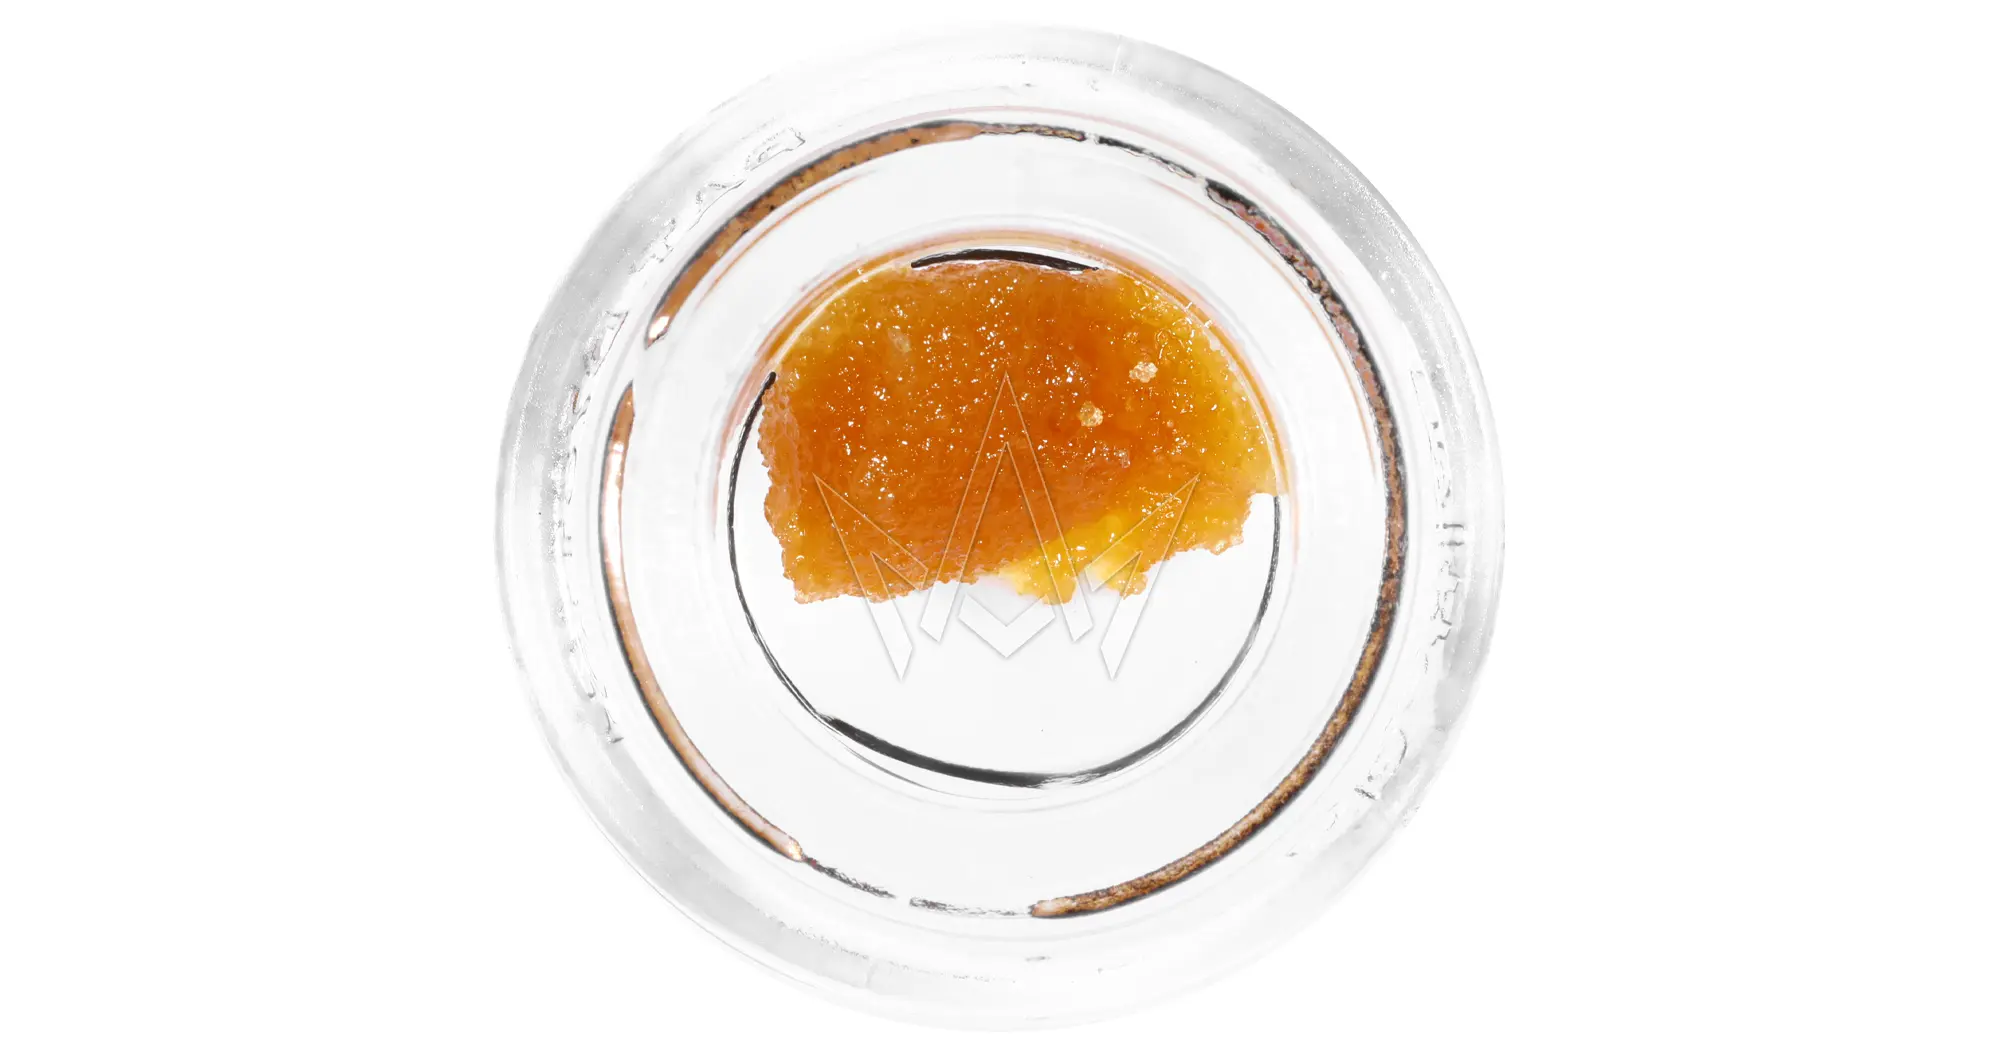 Purple Punch Live Resin